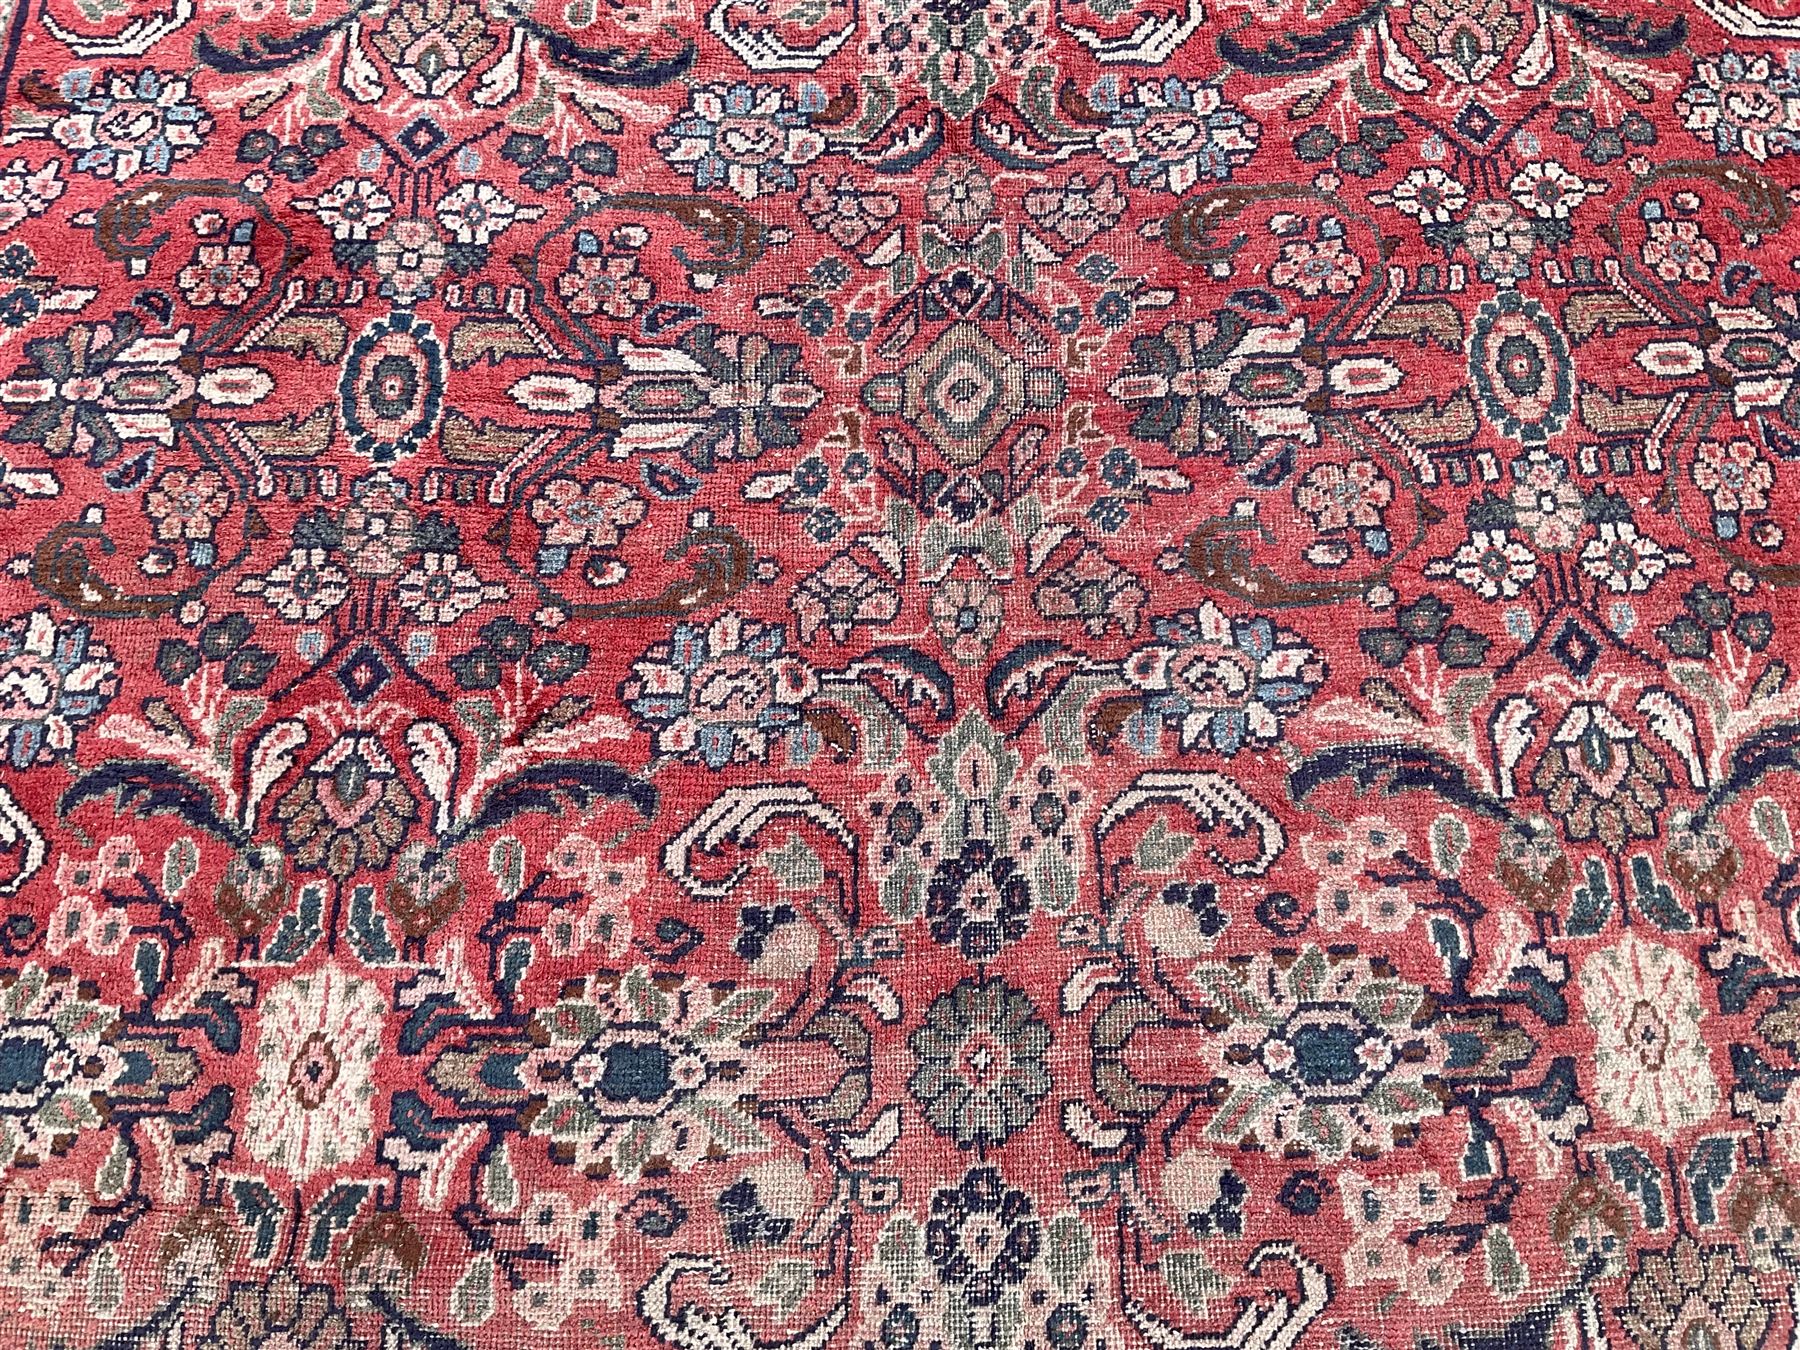 Persian red ground carpet - Image 4 of 6